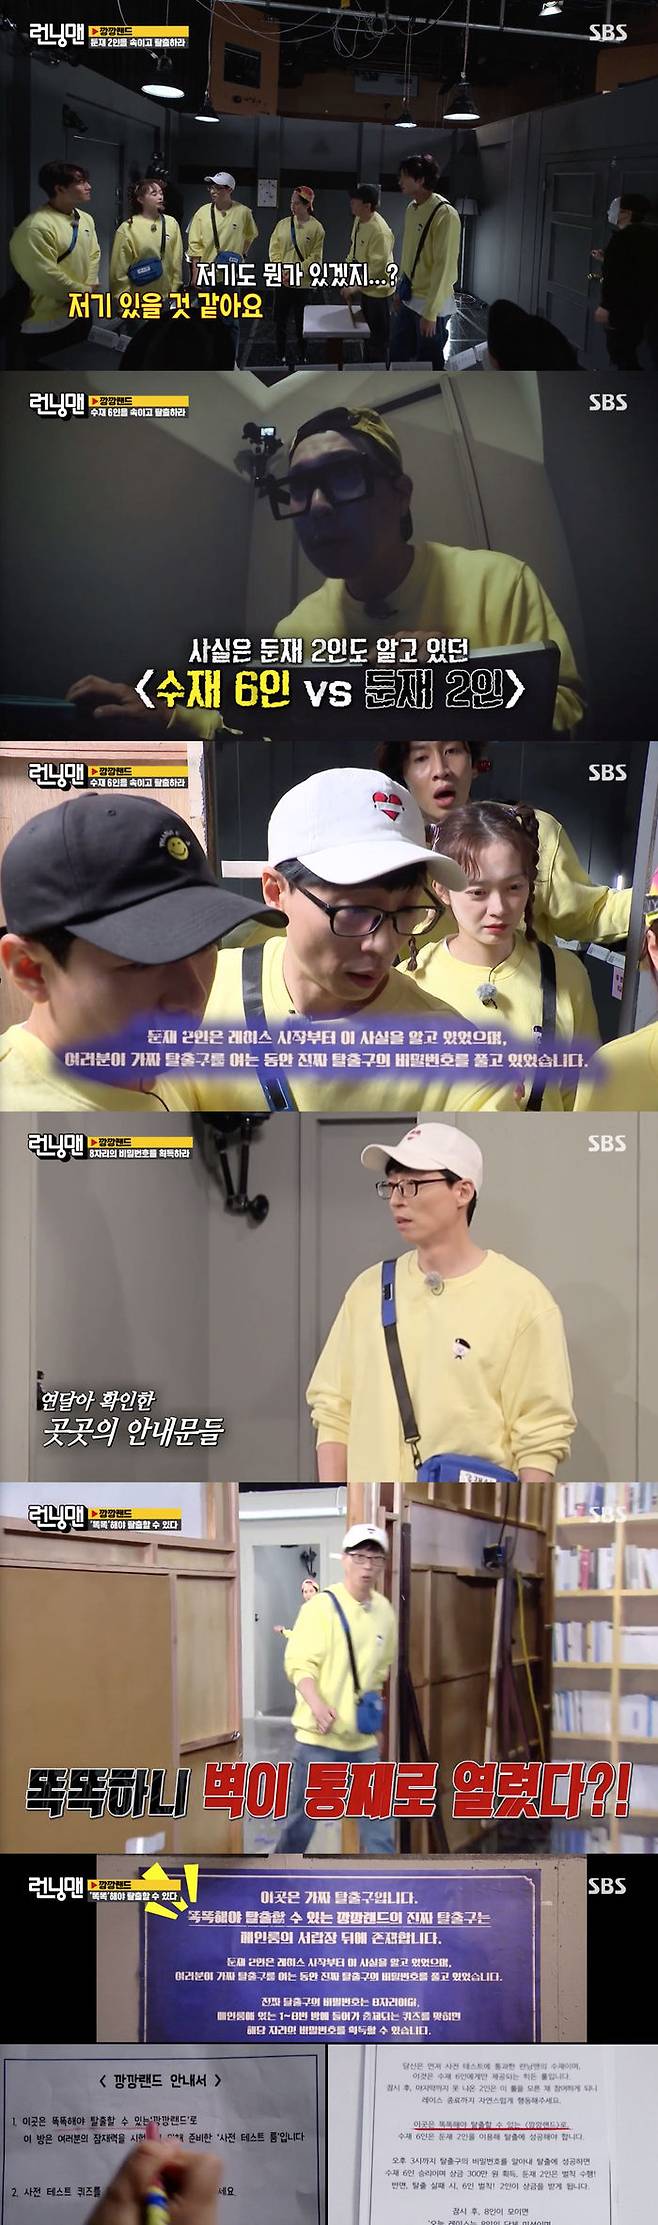 Yoo Jae-Suk wins final victoryOn SBS Running Man broadcasted on the 16th, Korean representative gangsters who were below average common sense invited the members of Running Man to the Rand.On this day, a Rand Race was held to escape only if it was smart.Susanna Reid 6, who escaped first in the preliminary test, completely deceived two of the blunt materials that had not escaped before, and escaped first.So Susanna Reid 6 entered the No Escape room and tried to open the escape by getting the password related to the escape.And at this time, two of the dunes had a mission to bounce the table tennis ball on the box and score it in the cup, but Susanna Reid 6 felt something strange when he saw two dunes.In fact, the Hidden Rule was provided to two of the dunes, who knew the Hidden Rule delivered to the Susanna Reid six and conducted another Hidden mission of their own.Two of the blunt materials solved the problem in eight rooms in the main room and found a secret number, and found a real escape route in the main room and escaped.Haha and Ji Suk-jin, who are two of the blunt materials, found the escape hidden behind the main room drawer and hit the password.And the Susanna Reid six opened the exit, matching the password smoothly in the No Escape room, but this was a fake escape, not a real escape.After learning late on about the existence of a real escape, Susanna Reid 6 quickly found a real escape and began to hit the password.At this time, however, Yoo Jae-Suk looked seriously at the notices written all over the place.Looking at the exit from that angle at that angle, Yoo Jae-Suk suddenly approached the real exit and knocked smartly and knocked, and the real exit opened wide and surprised everyone.Especially as far as Yoo Jae-Suk, which opened the door, it was very embarrassing: In fact, Lands door was open if its smart even though it doesnt know the secret number.Only then, the members were sighing when they saw the phrase smart and escape emphasized in each guide.Susanna Reid 6 won the final victory in the performance of Yoo Jae-Suk, and Haha and Ji Suk-jin, two of the dungeons, became the main characters of the penalty.The two laughed at making the top model to make a NEW hunk after Yang Se-chans hunk.